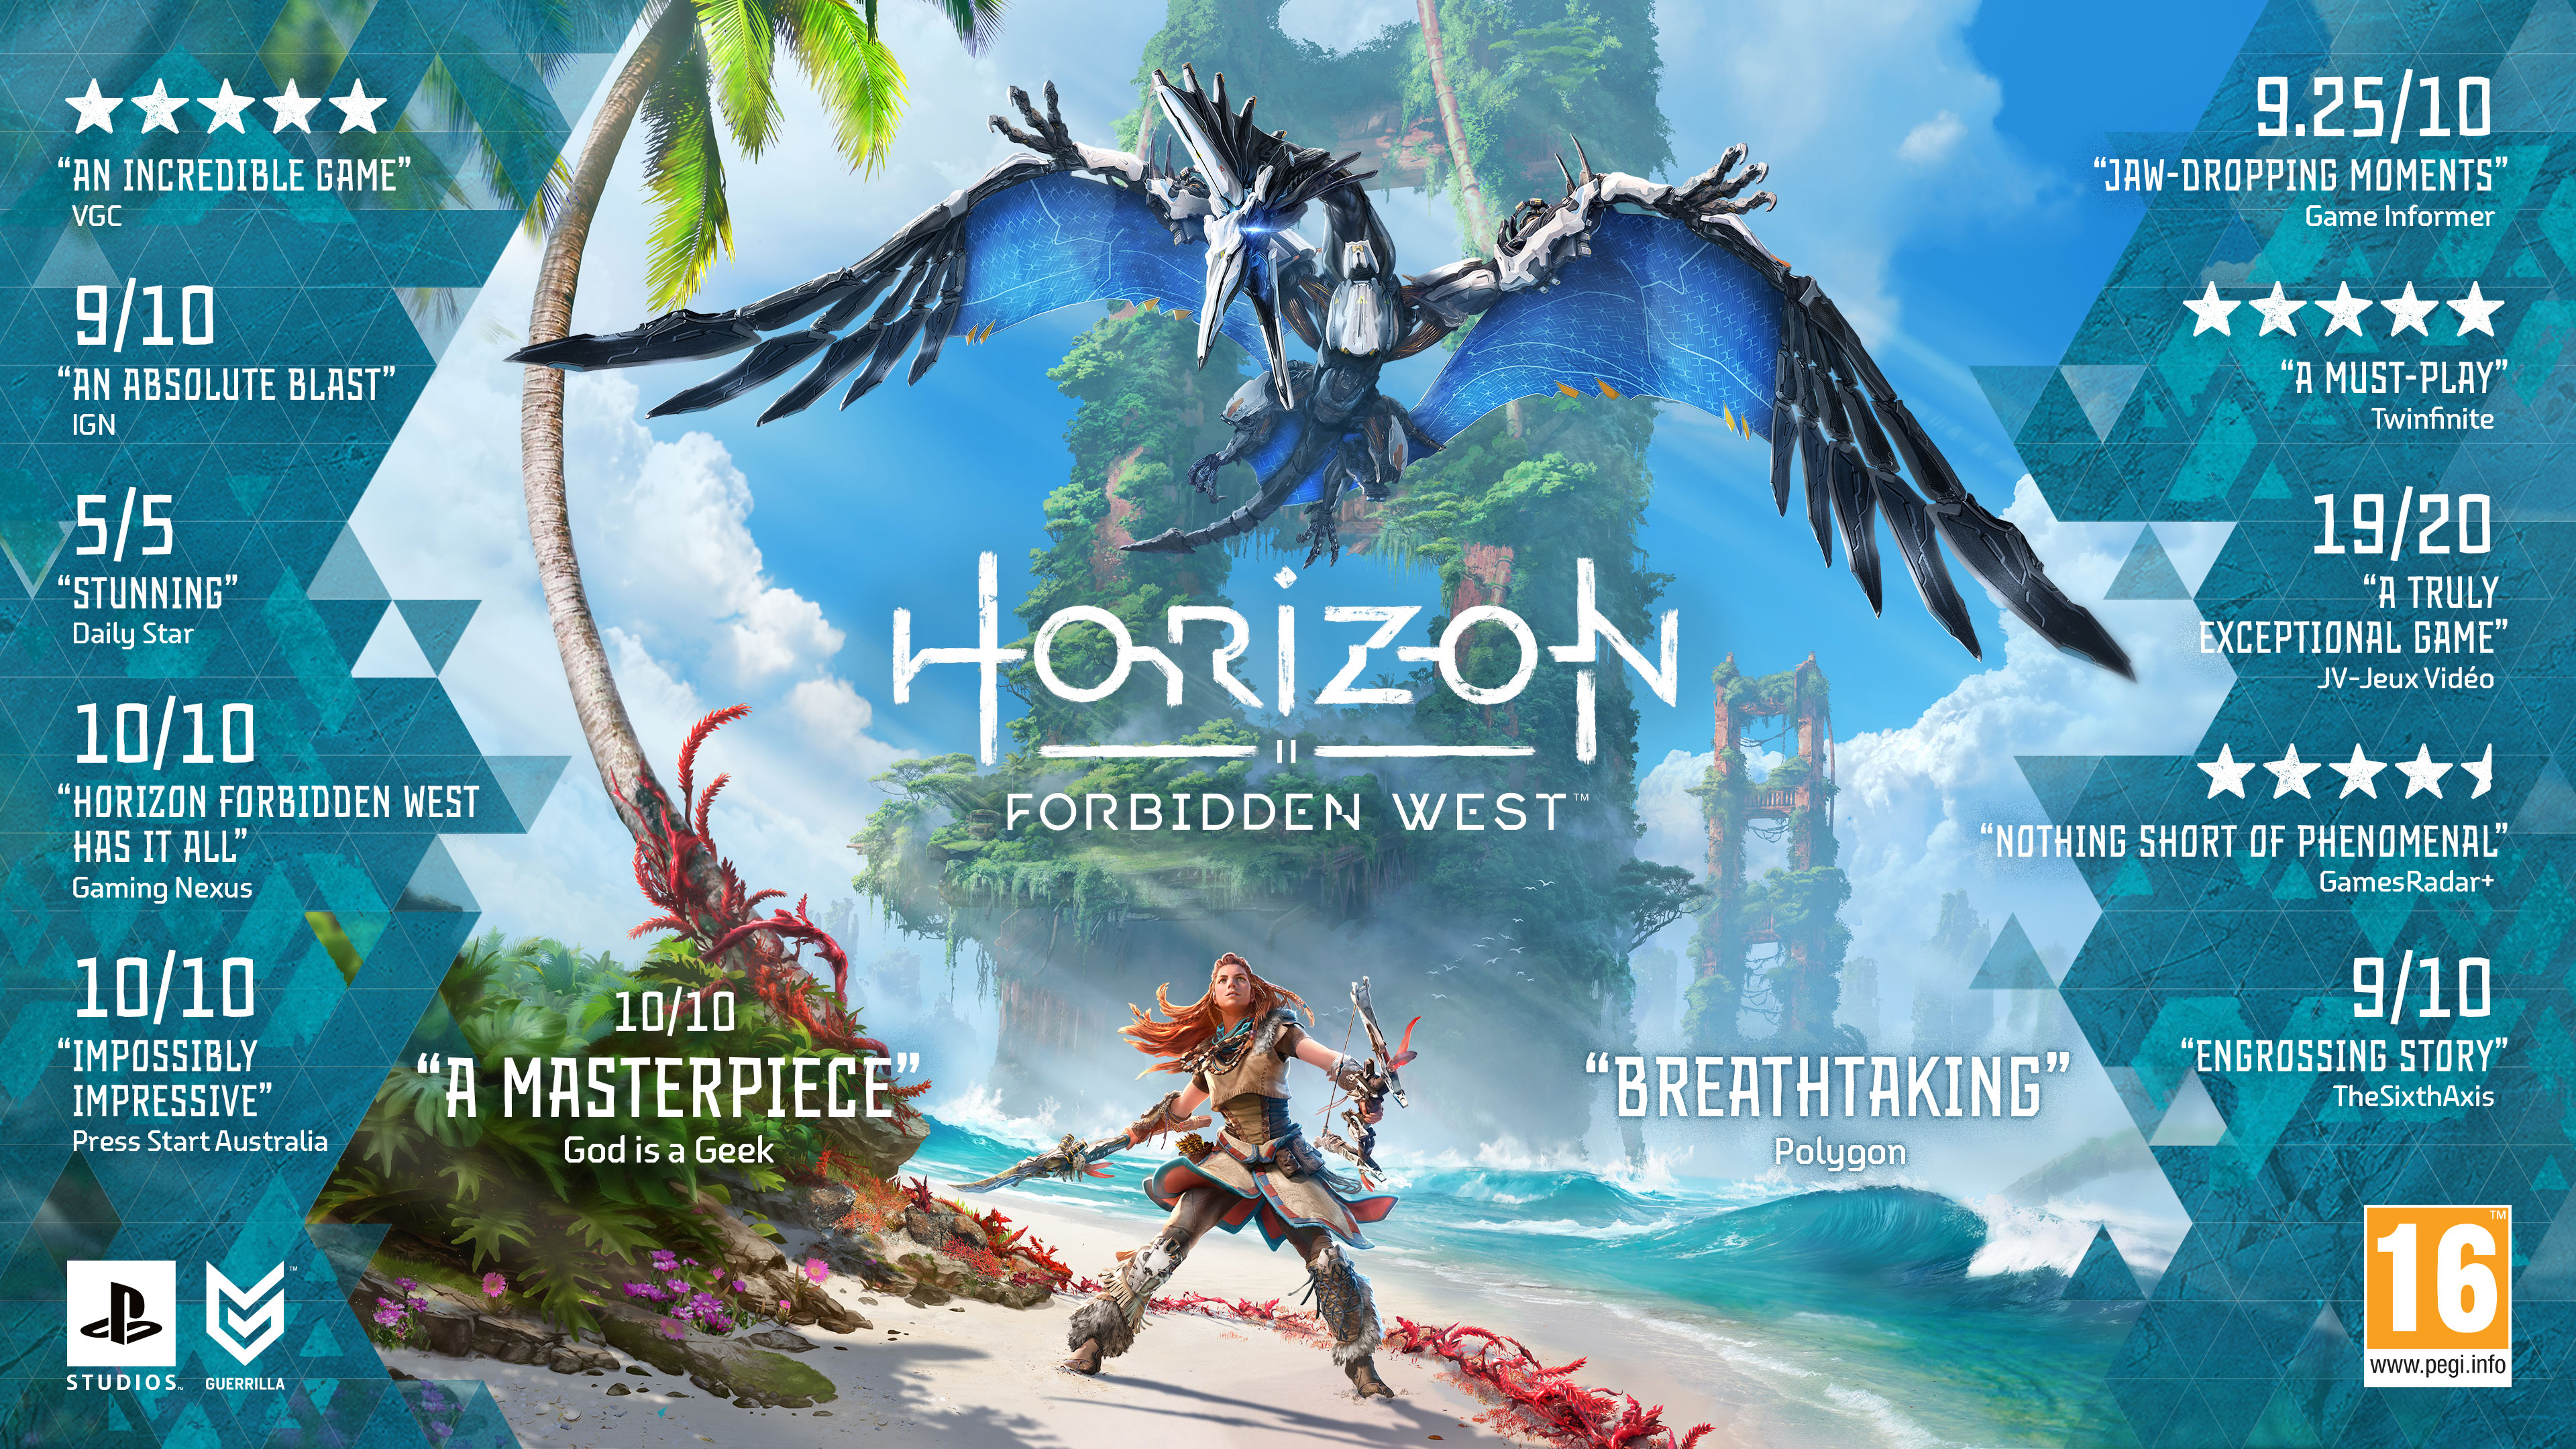 Horizon Forbidden West image and accolades